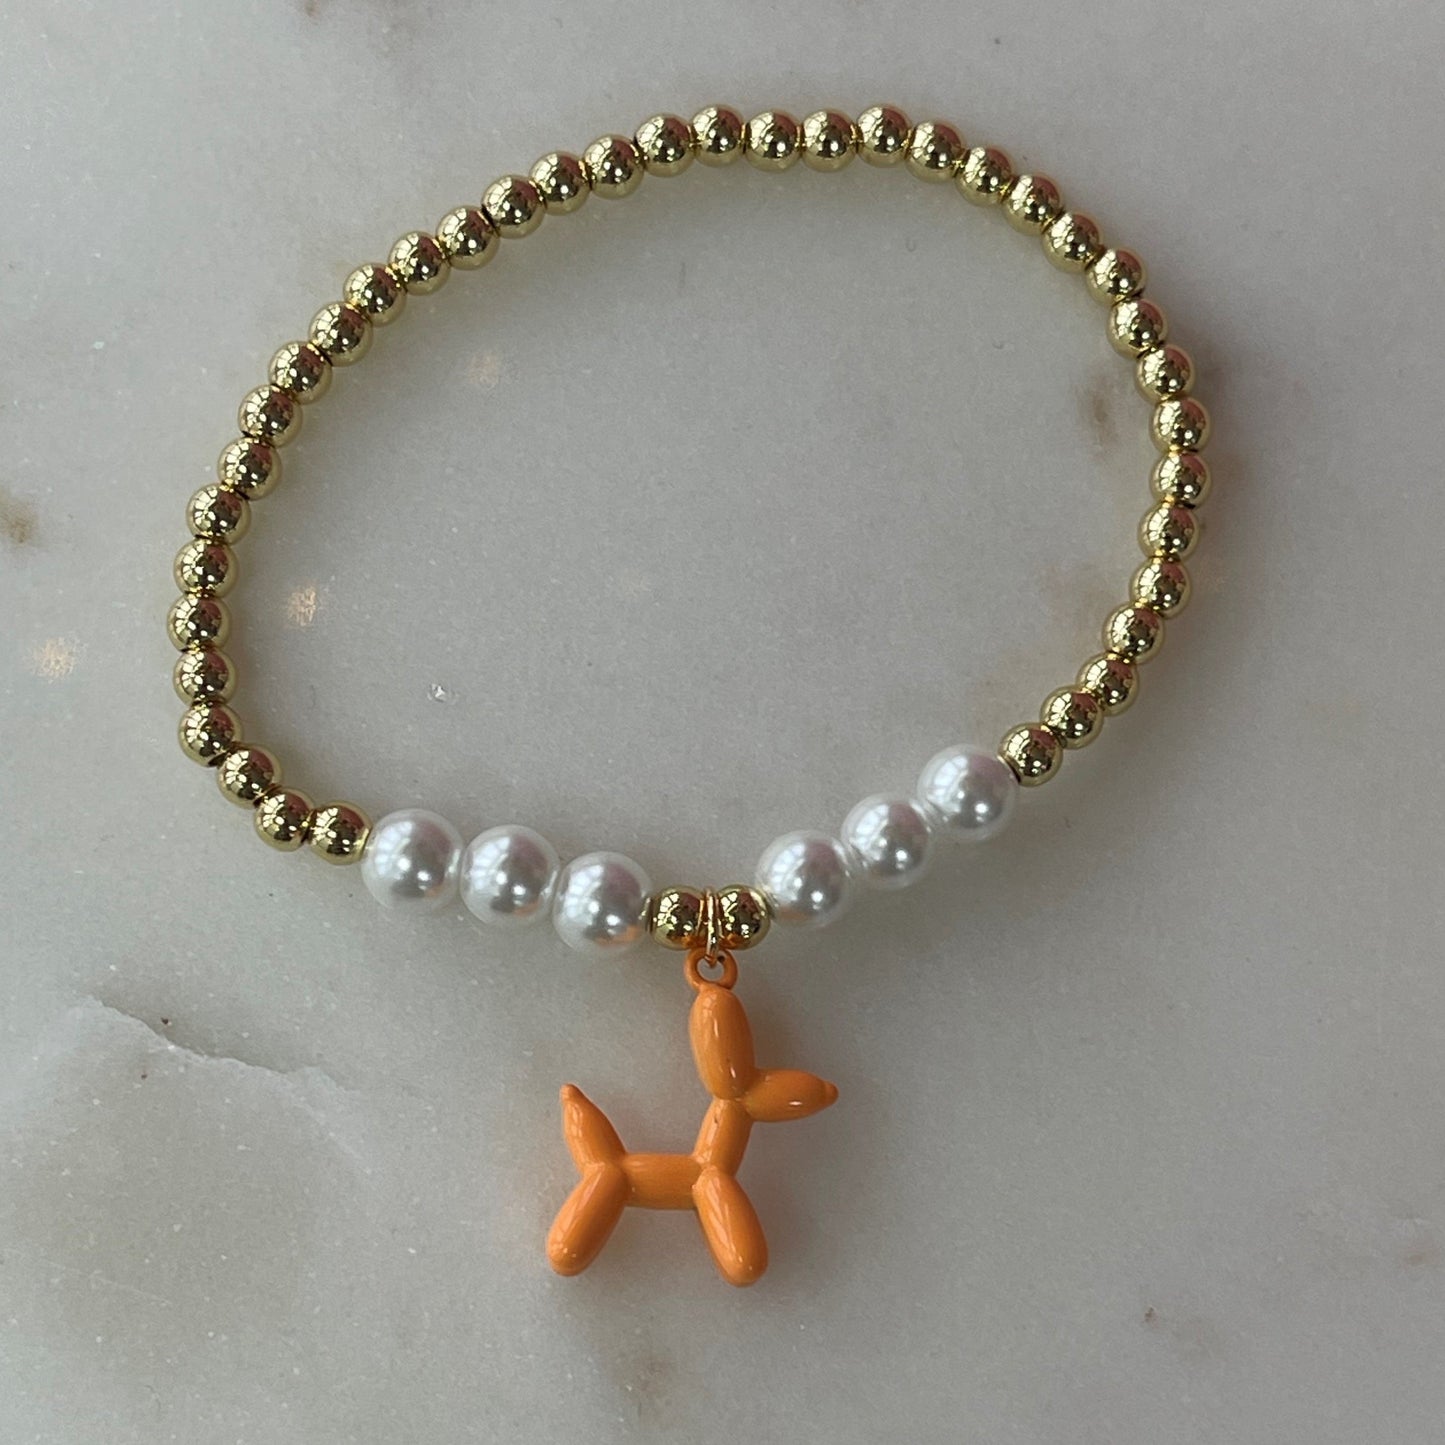 gold and white pearl band bracelet with an orange balloon shaped dog